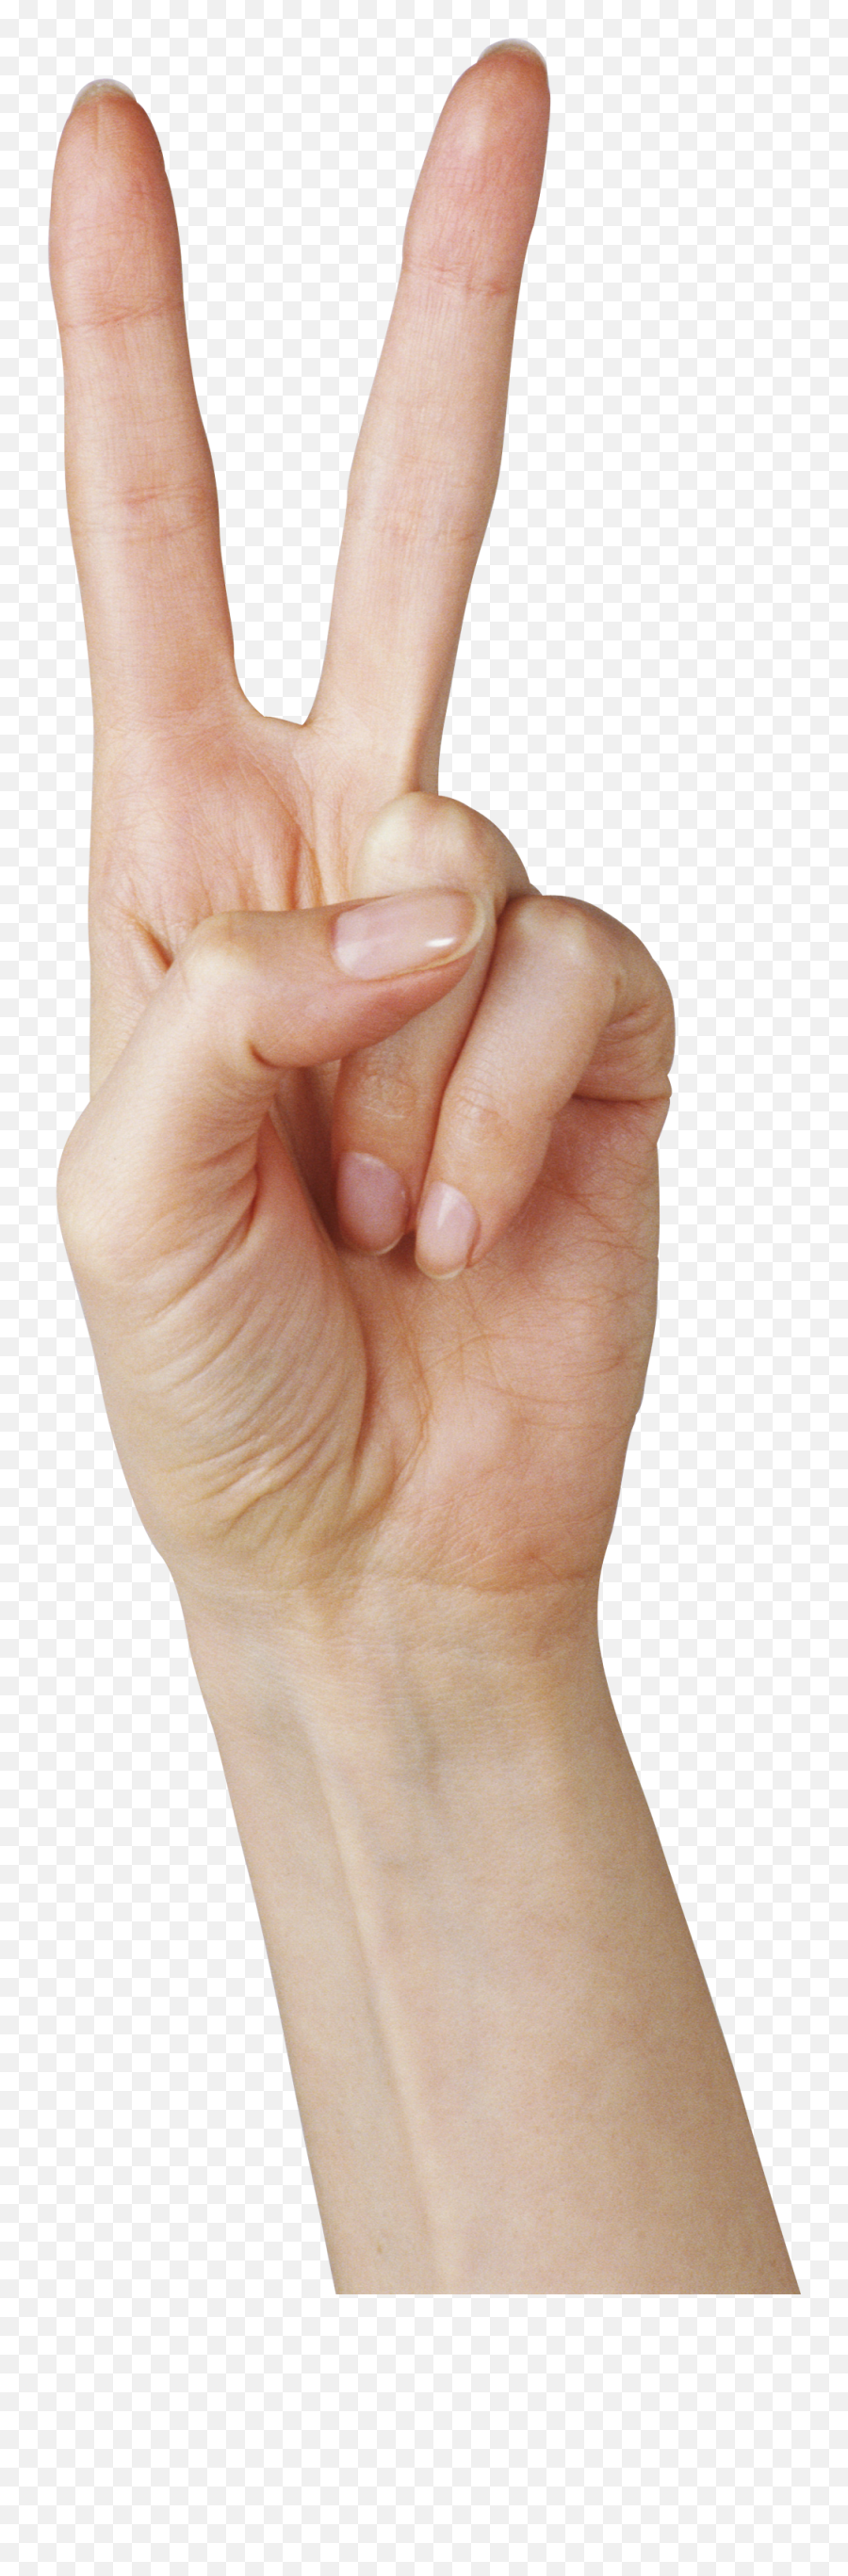 Hands Png Free Images Pictures - Number 2 Hand Gesture Emoji,Two Hand Emoji Meaning